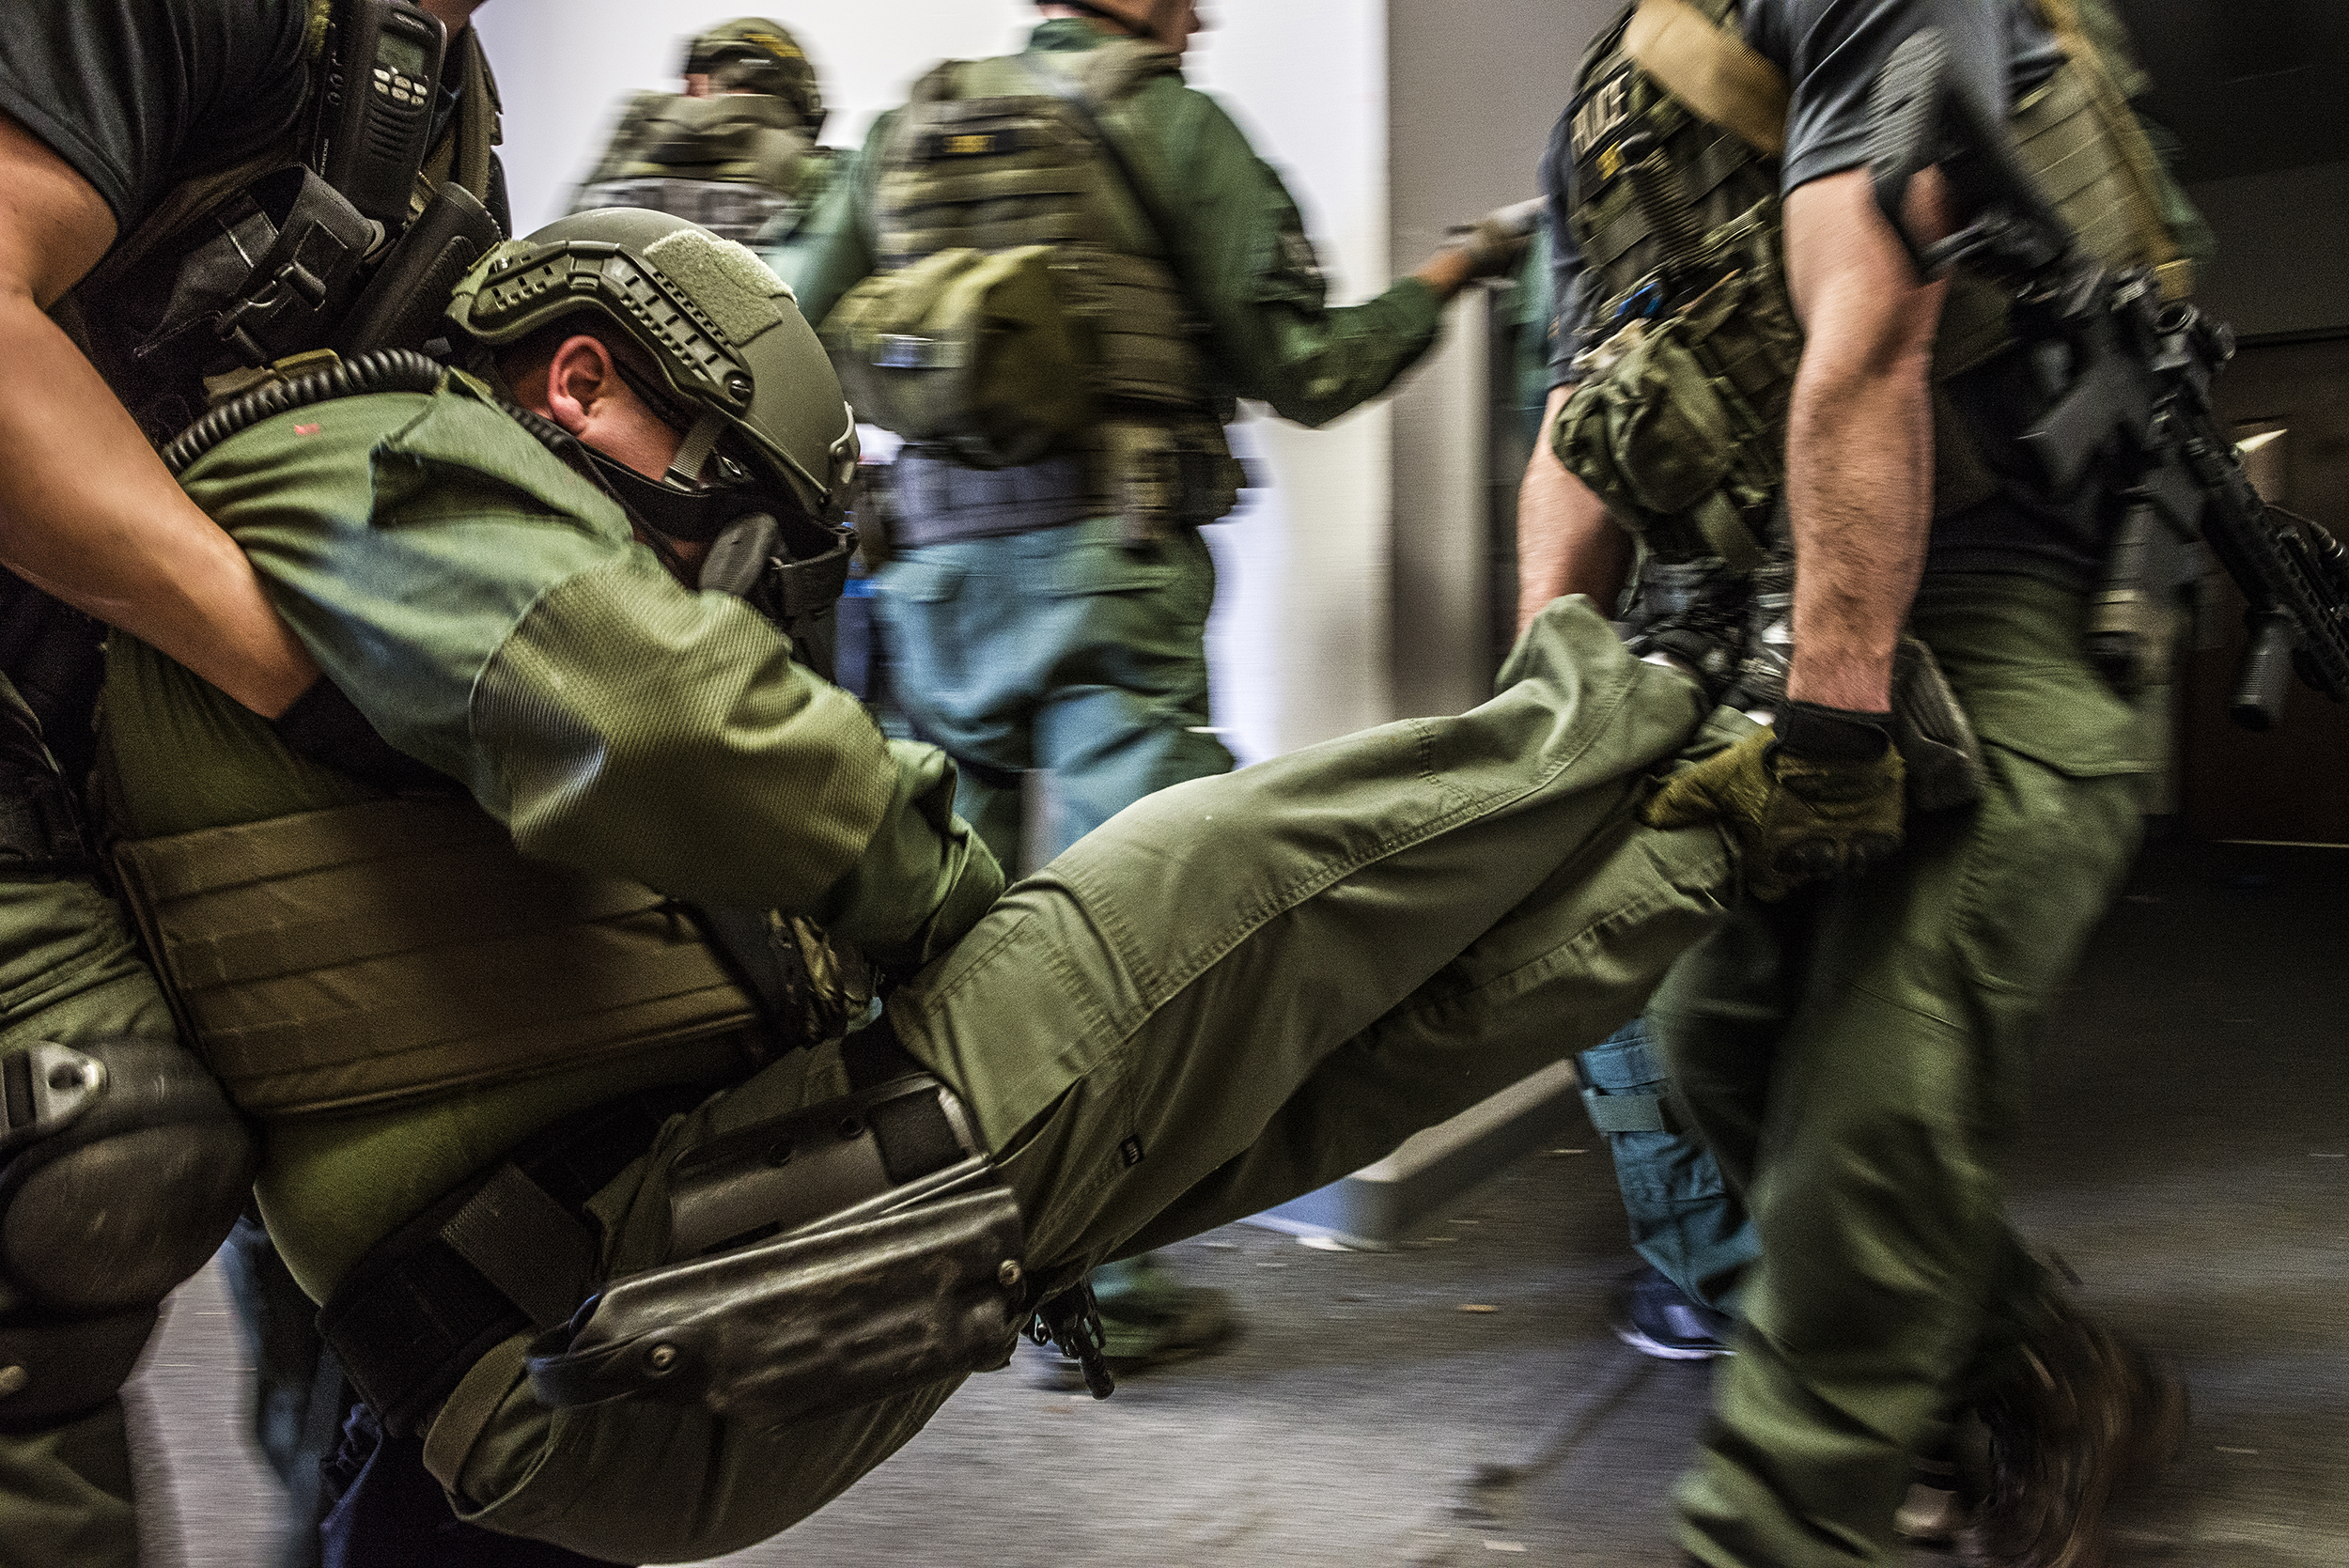  After a simulated IED explosion eliminates an officer, police carry him from a training facility near Mansfield, TX.  Due to funding and manpower constraints, the Southwest Regional Response Group, composed of suburban police officers, was created f